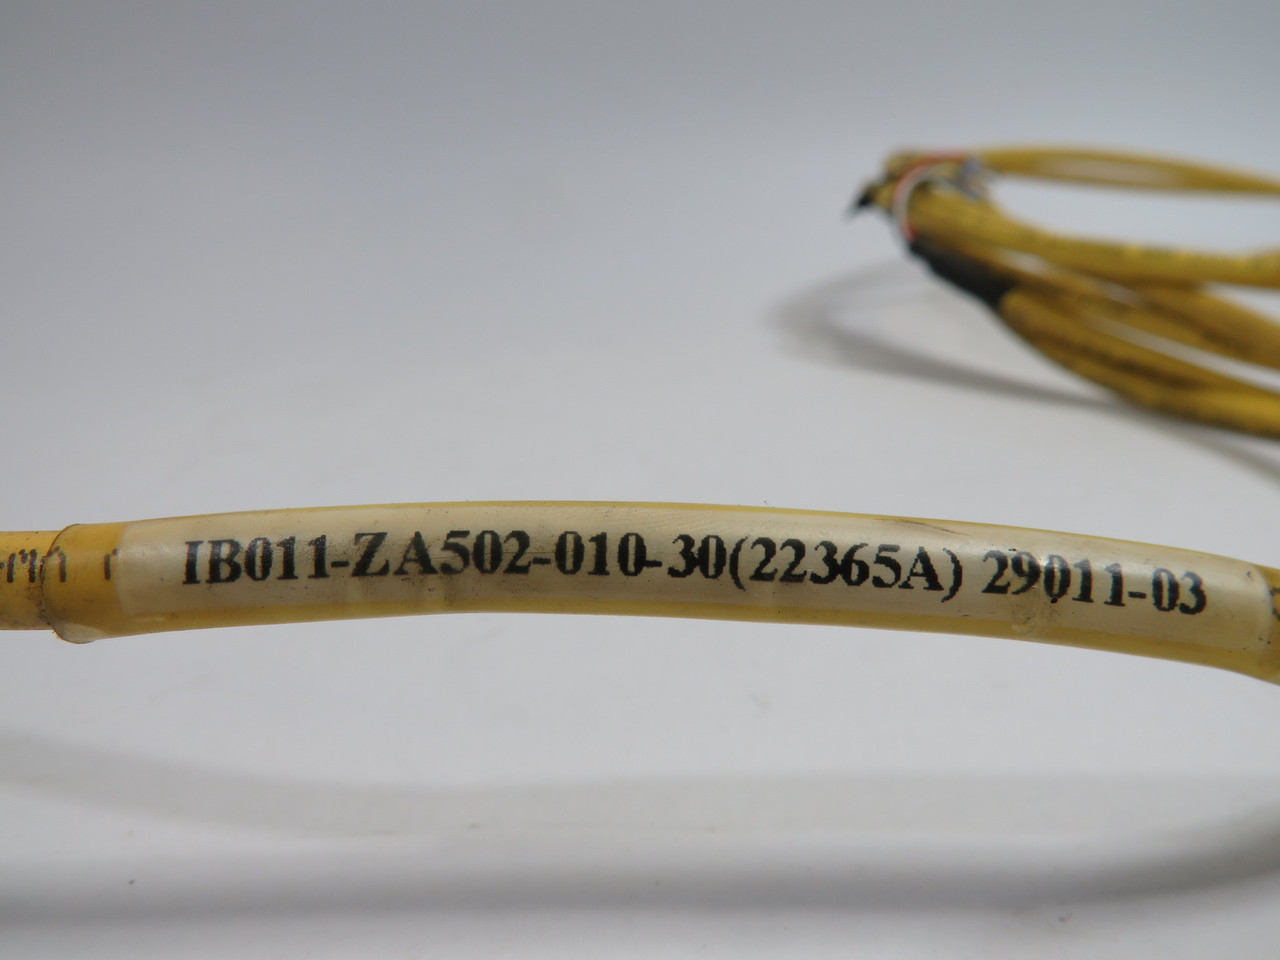 Trex-Onics IB011-ZA502-010-30 Connector Cable 3m Cut Cable 5-Pin Female USED